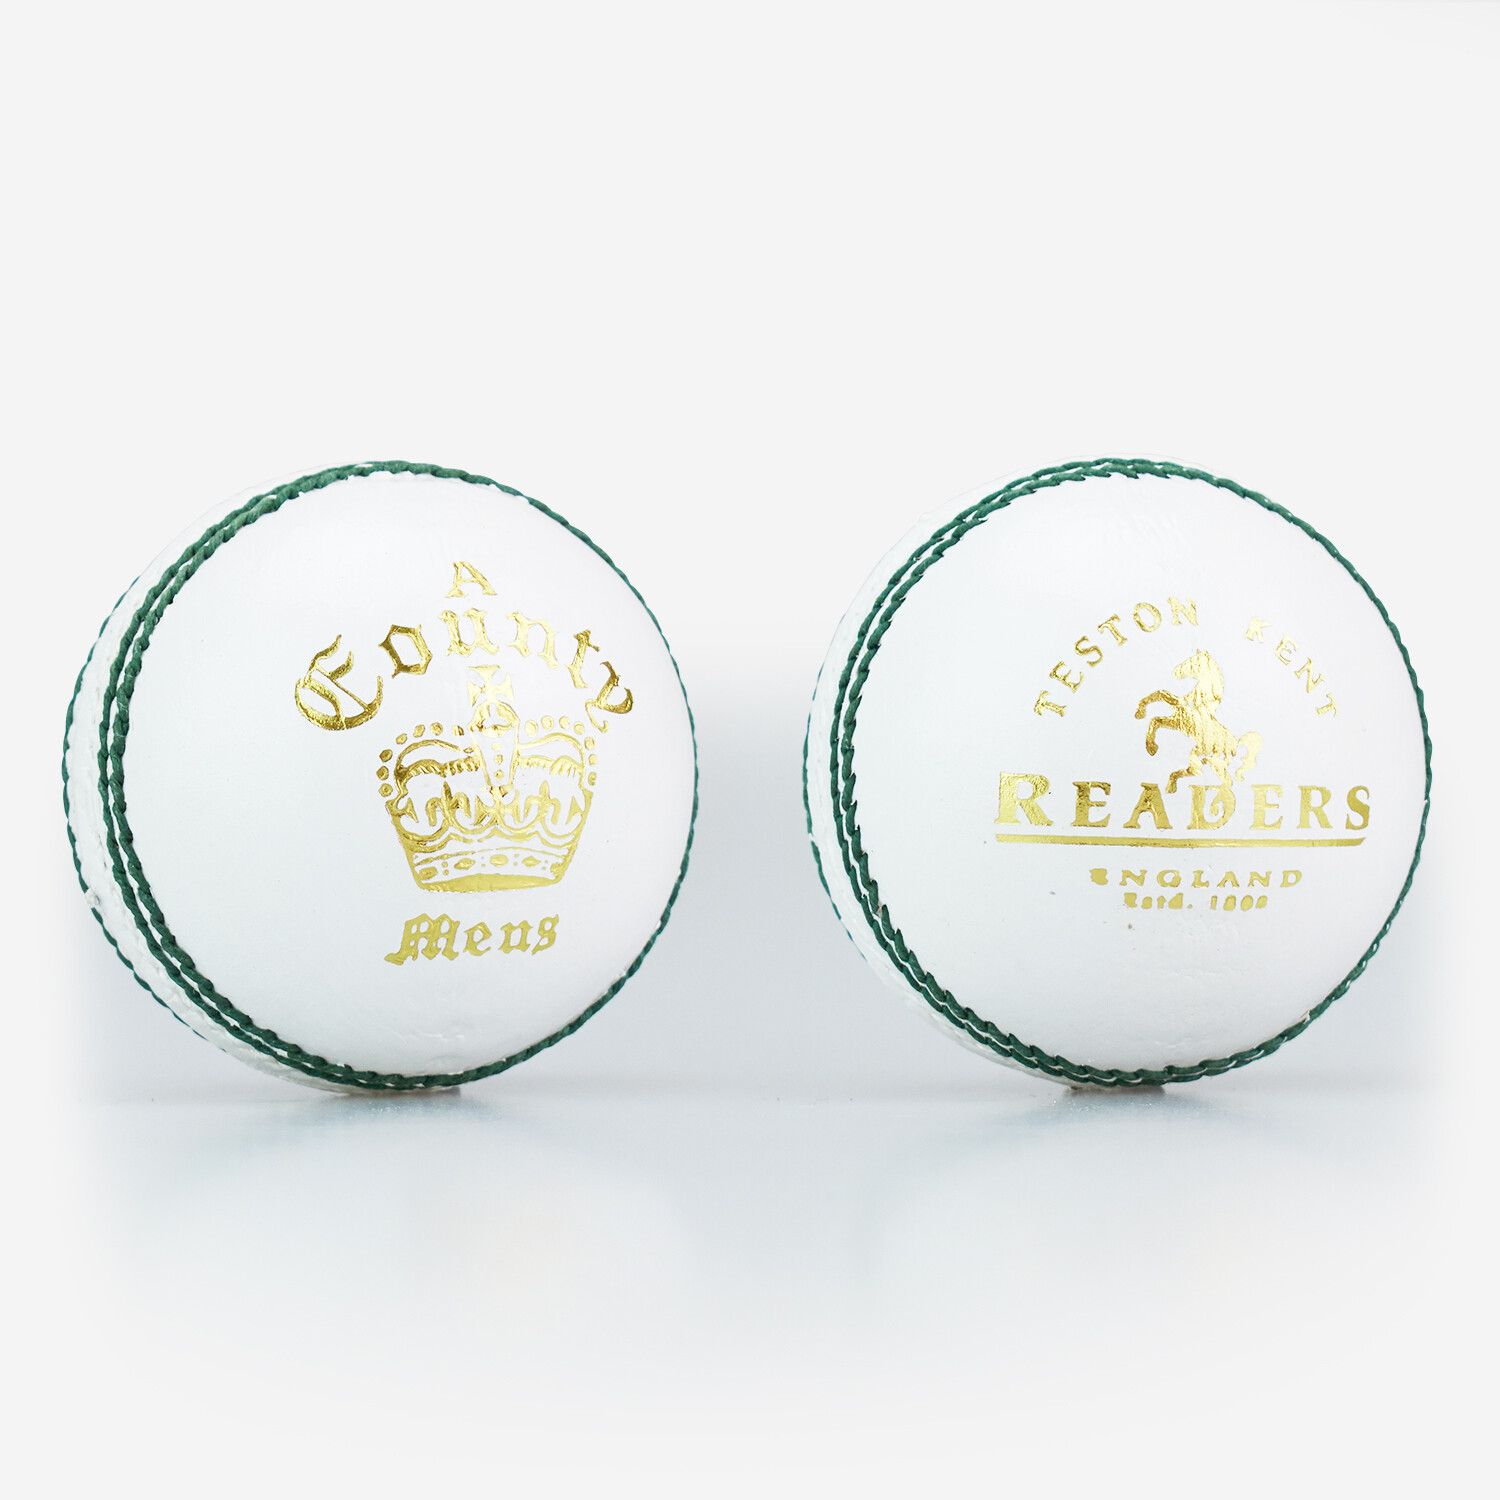 Readers County Crown White Leather Cricket Ball